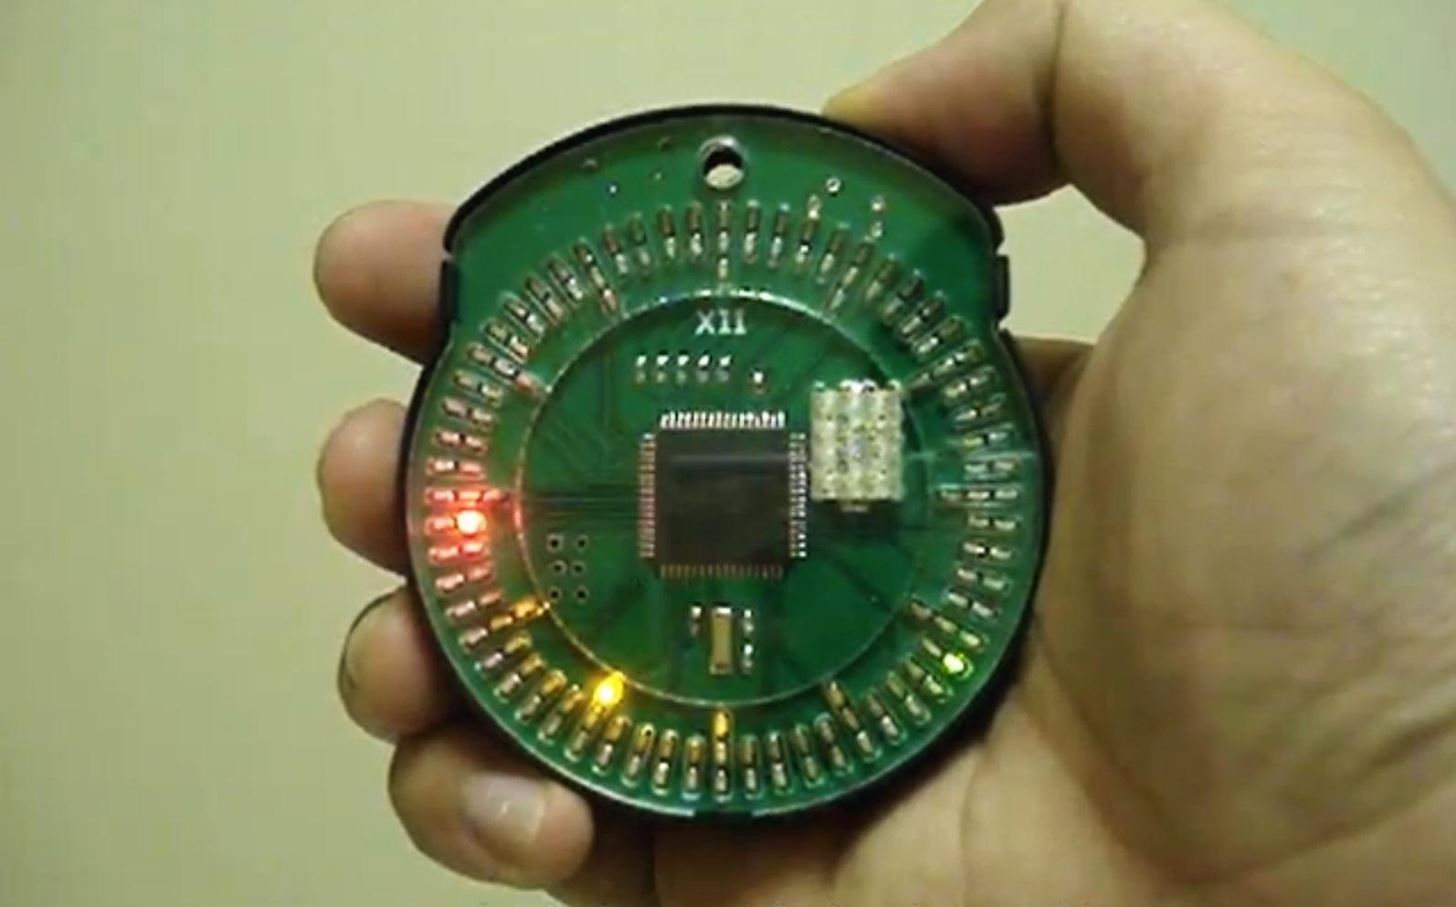 How to Make a Totally Geeky LED Pocket Watch That Tells Time in Colors